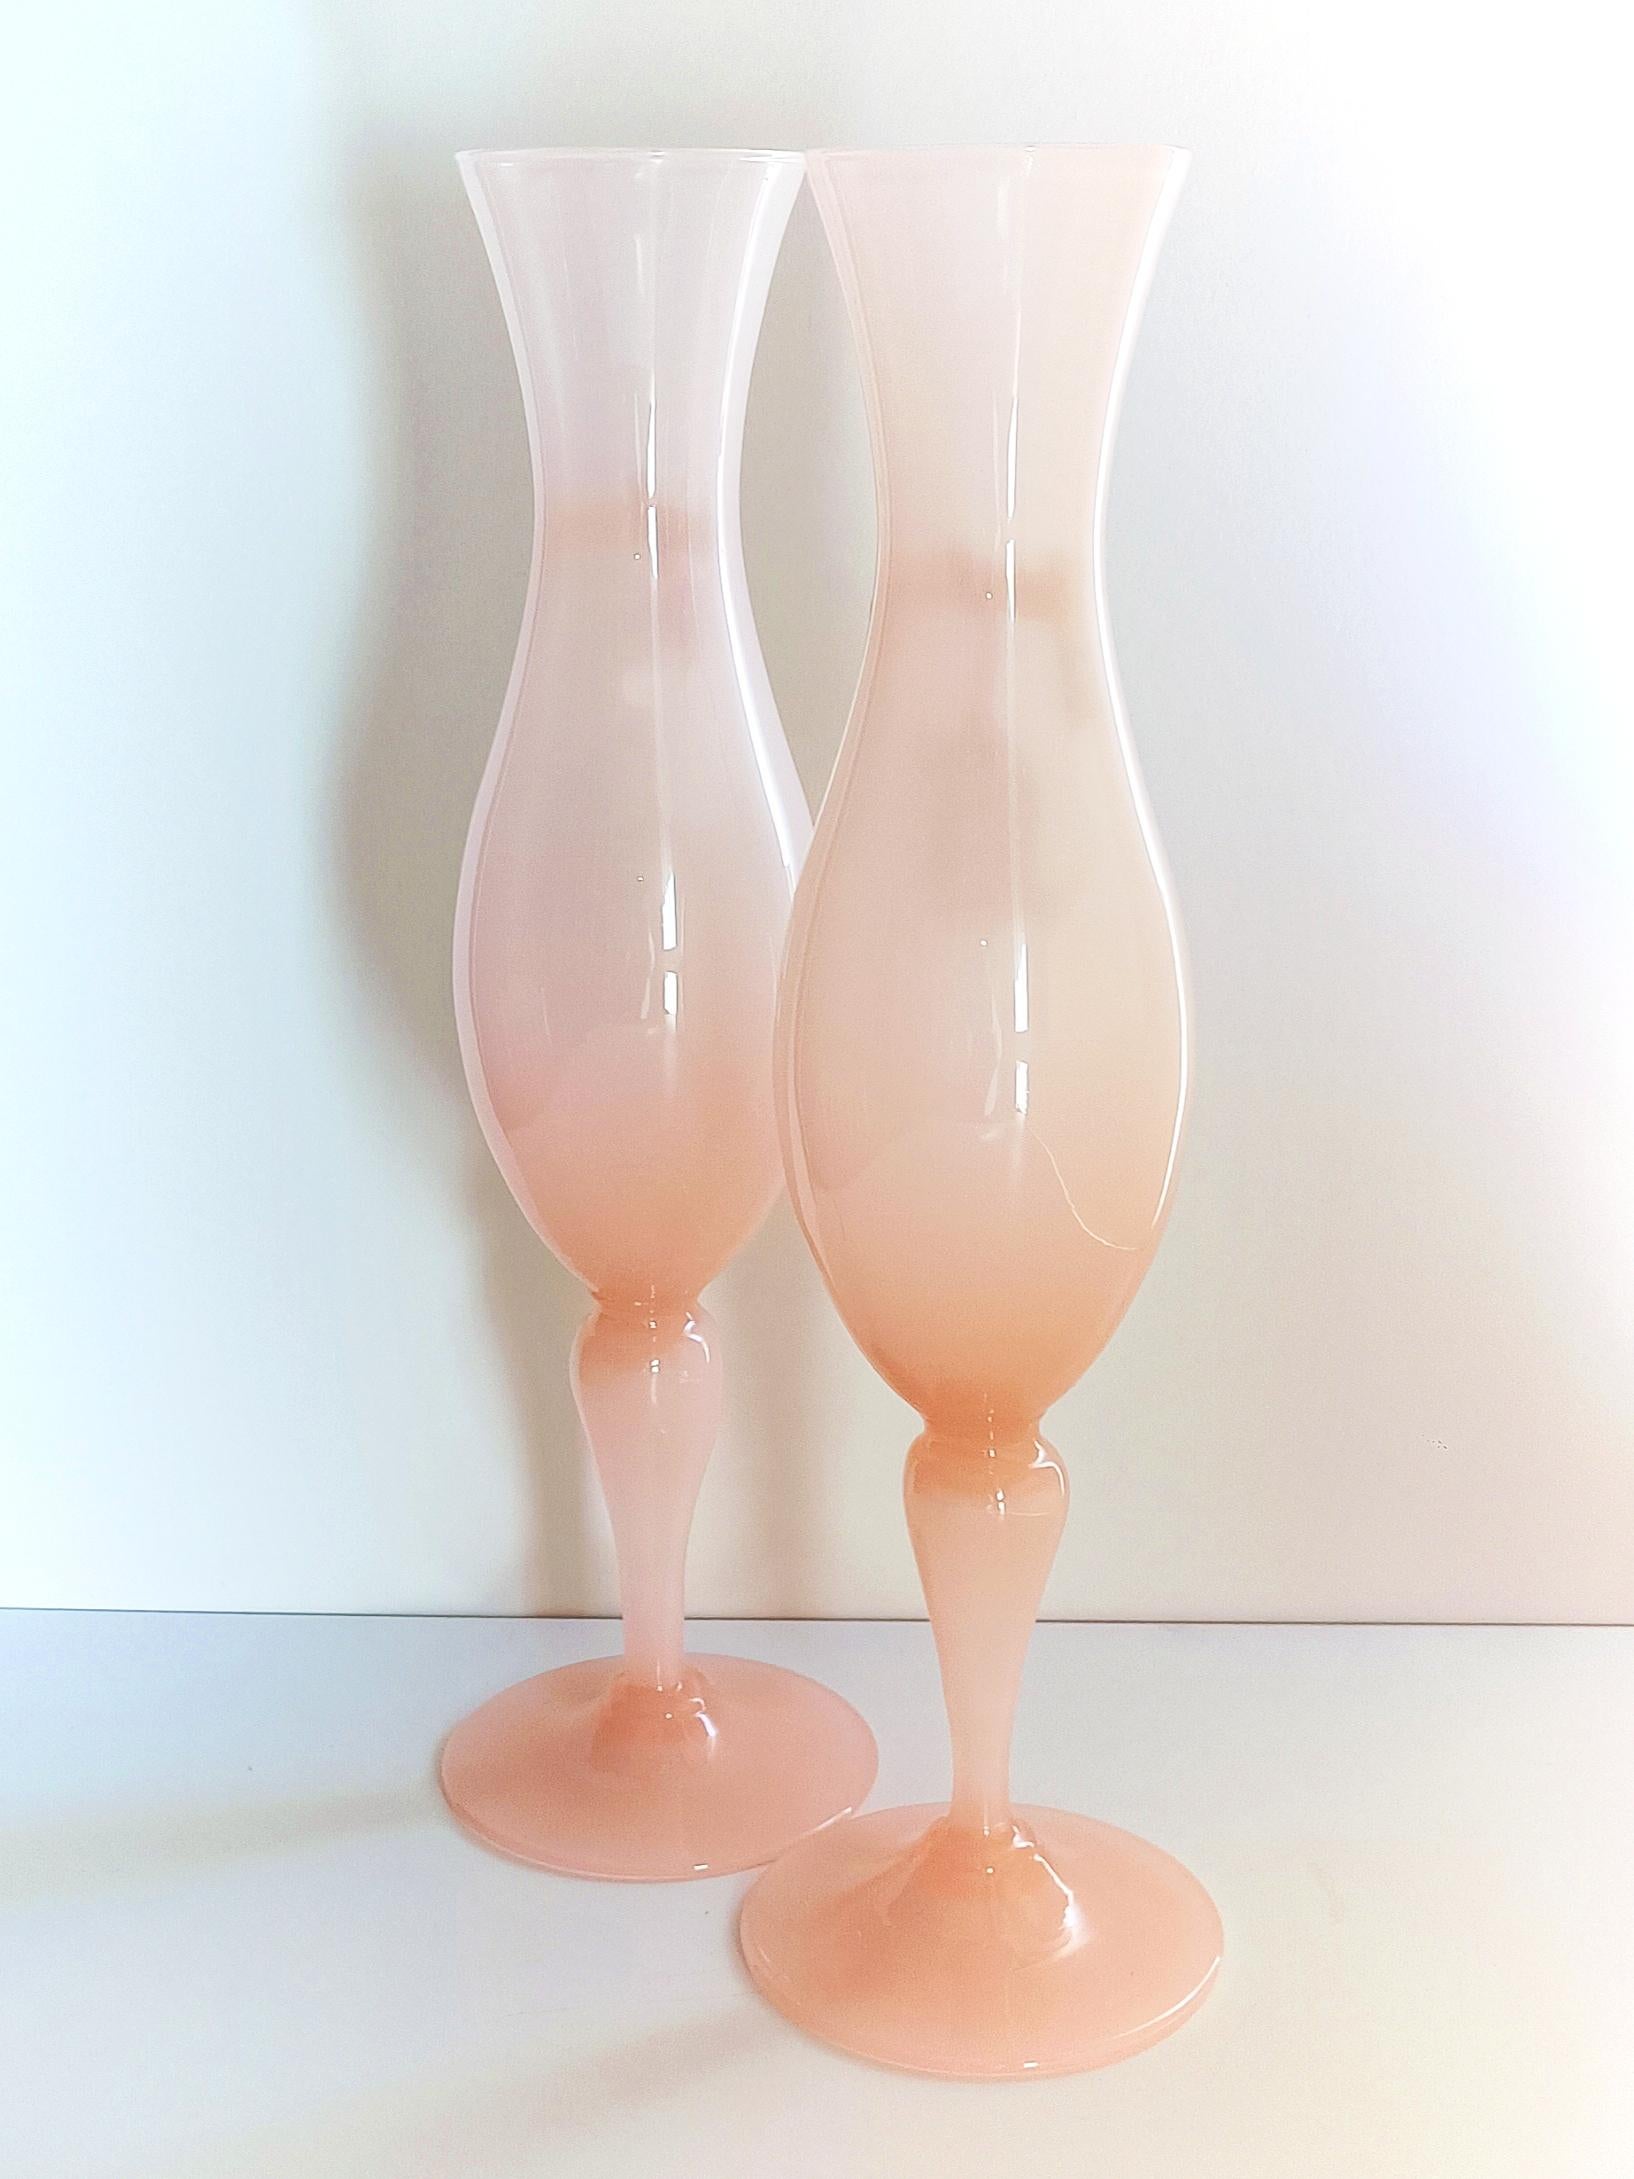 Mid-20th Century French Style Opaline Florence Glass Pair of Mid Century Cup-Vases, 1950s For Sale